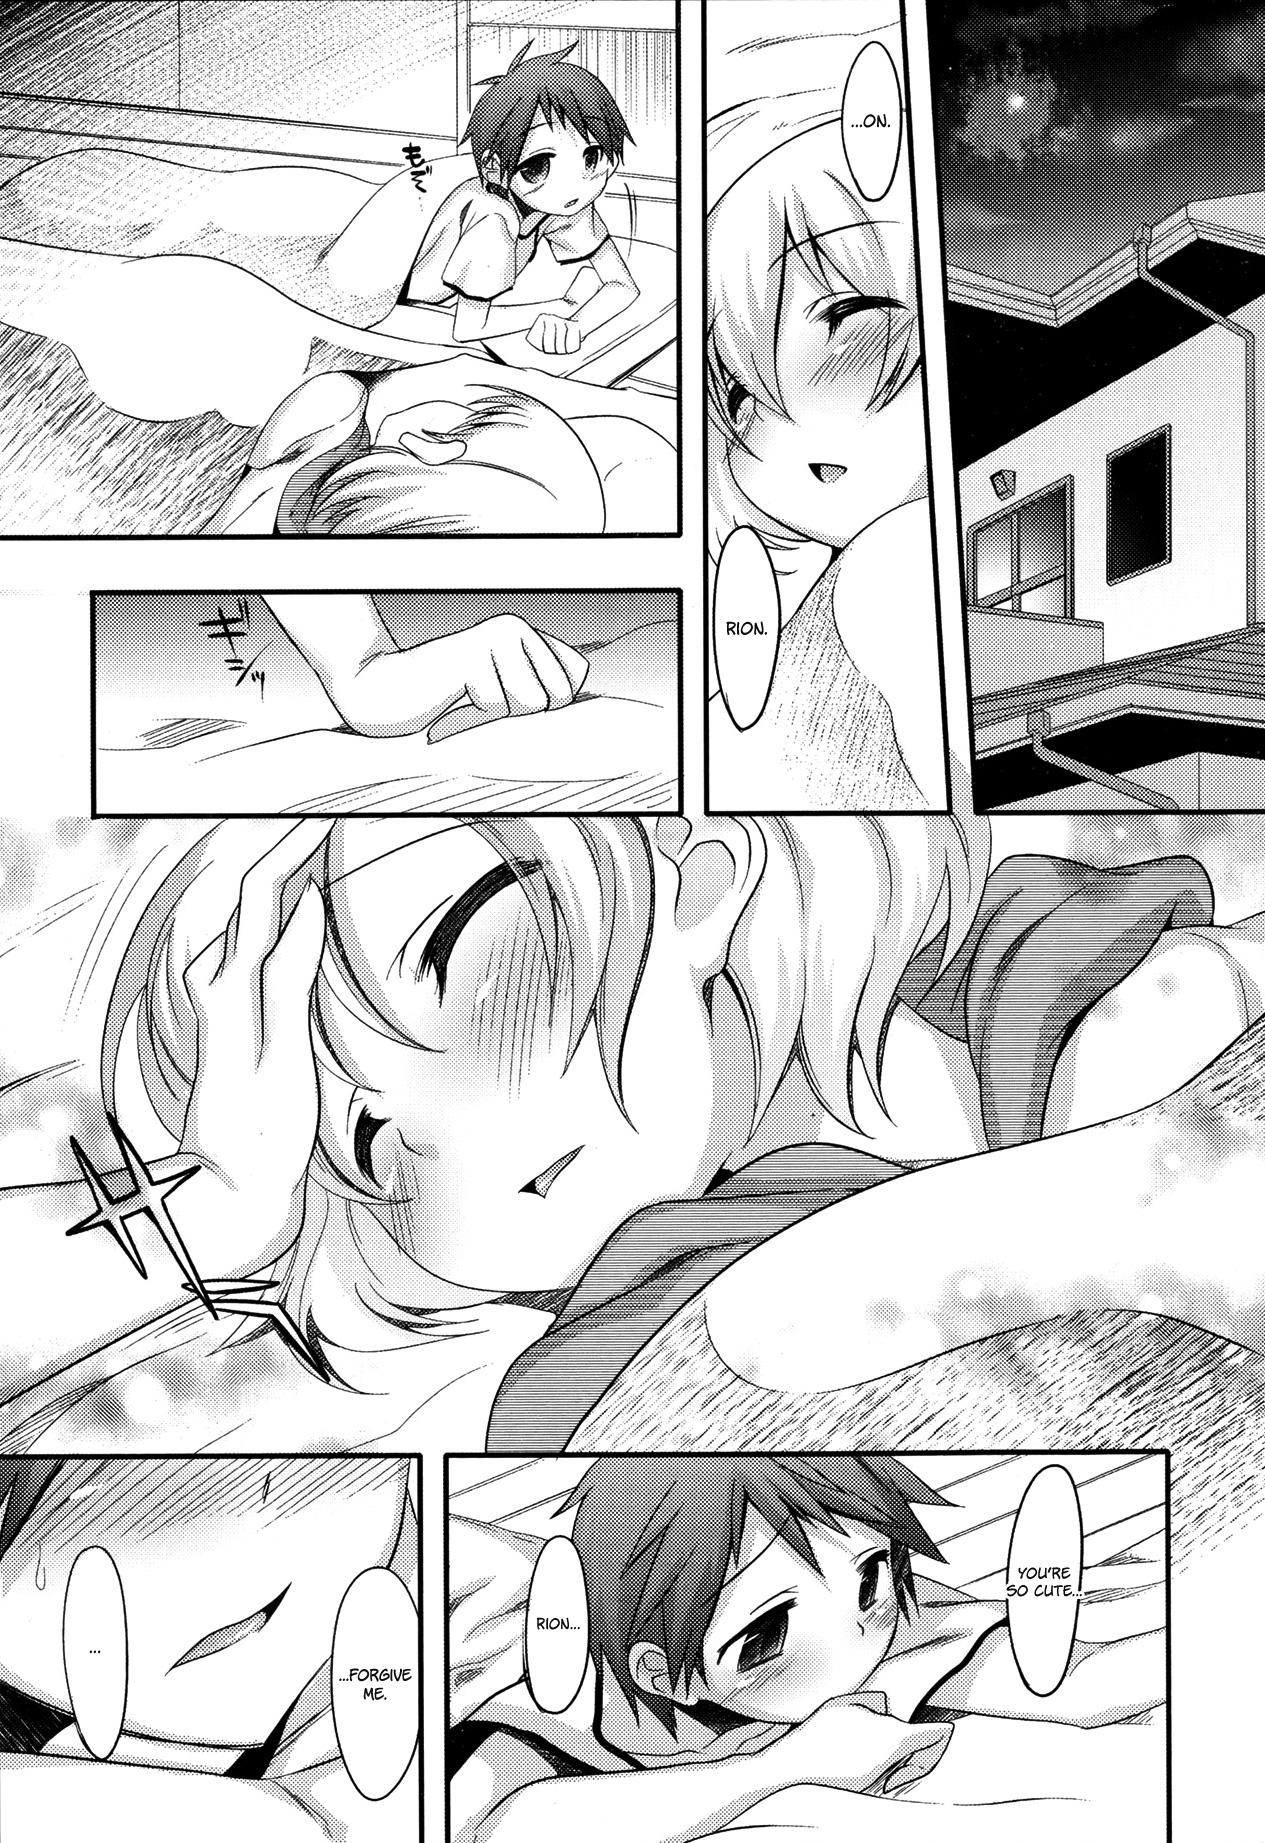 Spit Yoru no Tobari no Orita Nochi | After the Curtain of Night Gets Down Spying - Page 3